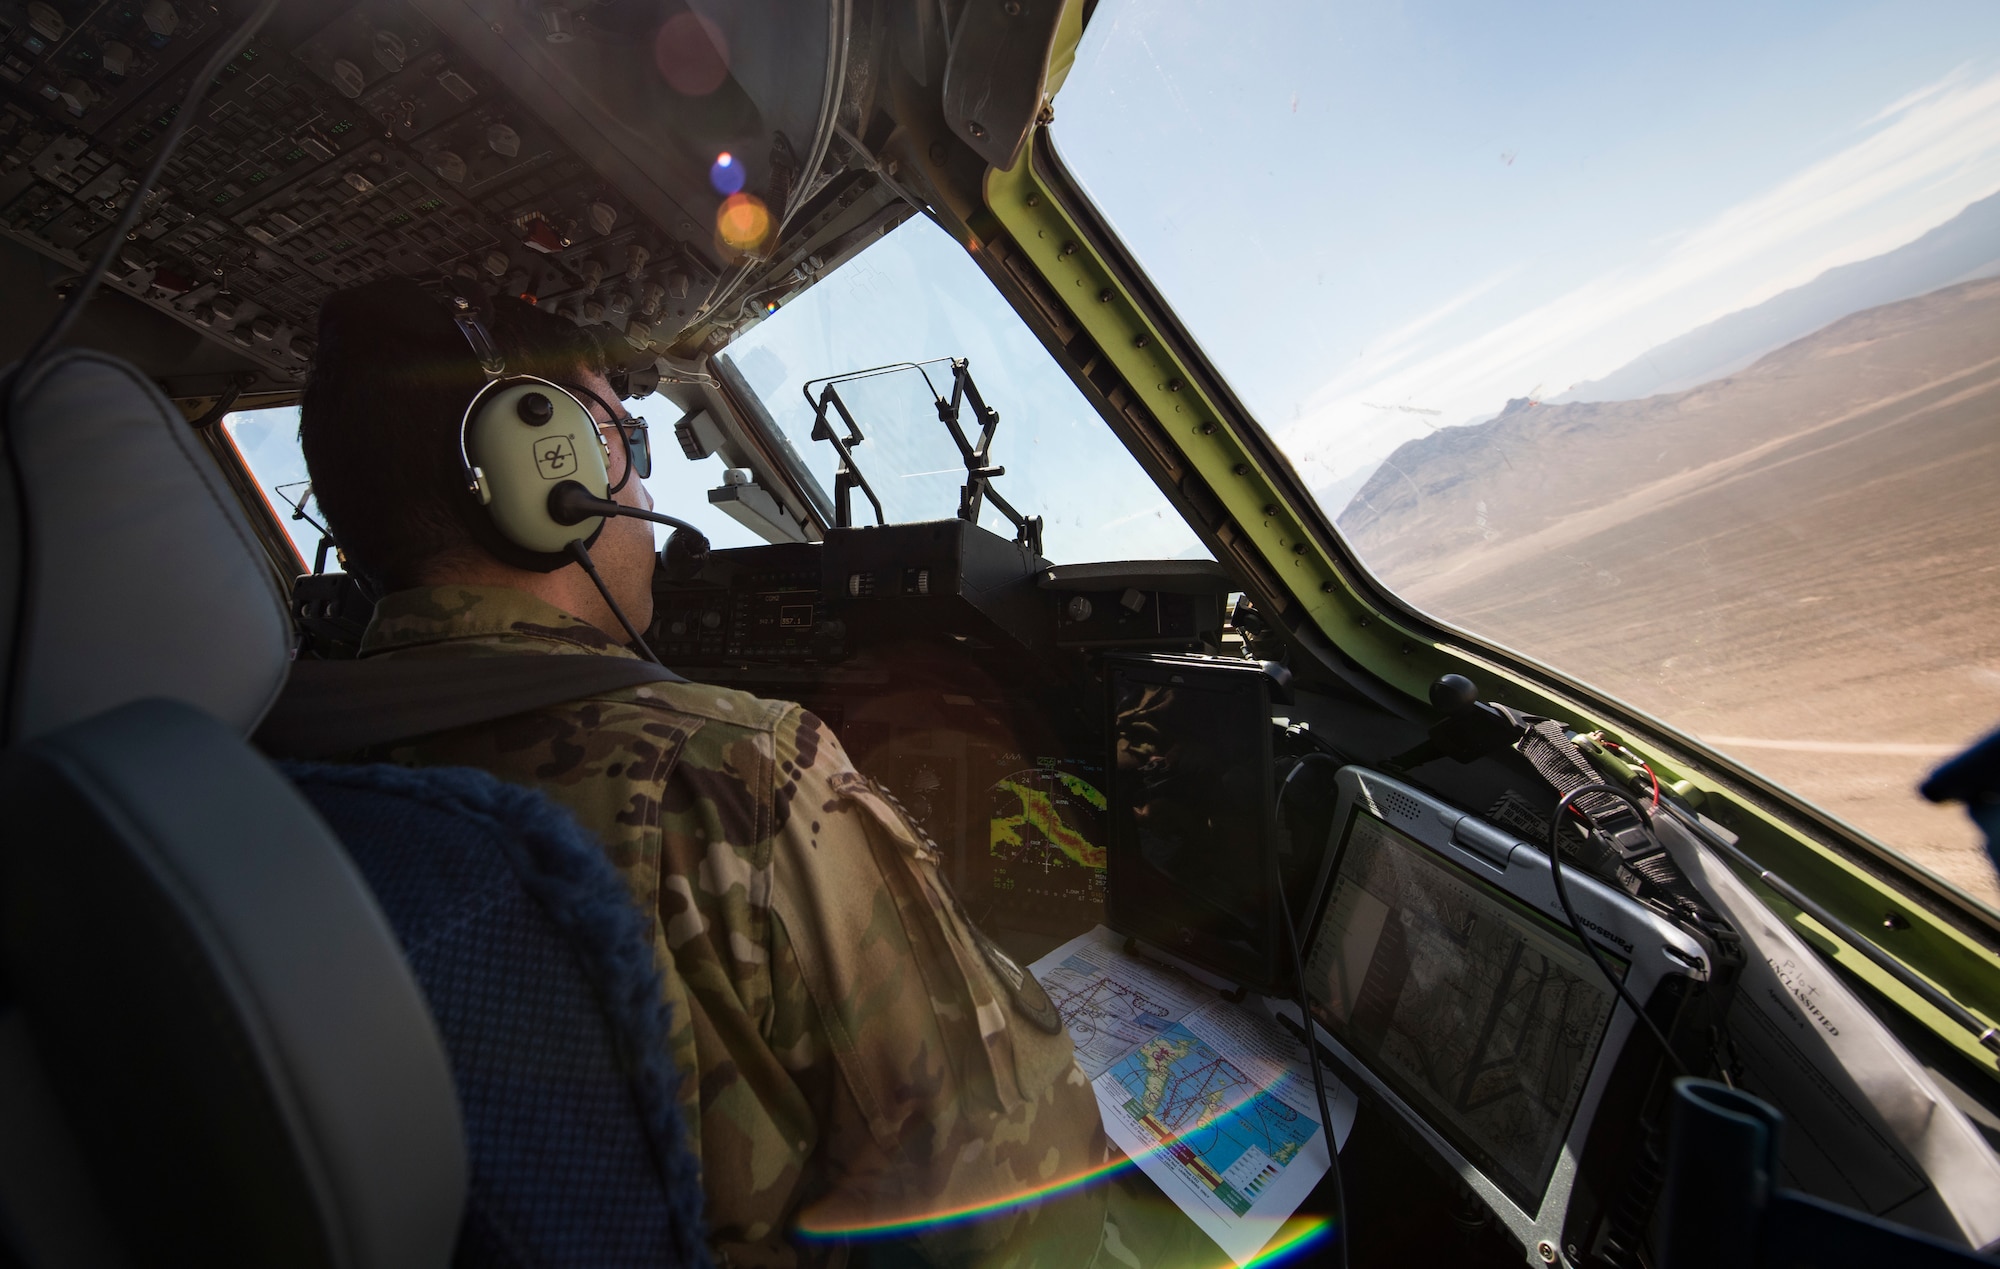 Capt. Ali Chinisaz, 6th Airlift Squadron instructor pilot, maneuvers a C-17 Globemaster III cargo aircraft towards a runway on the Nevada Test and Training Range, June 9, 2018. The crew took part in a joint forcible training exercise. (U.S. Air Force photo by Airman 1st Class Andrew D. Sarver)